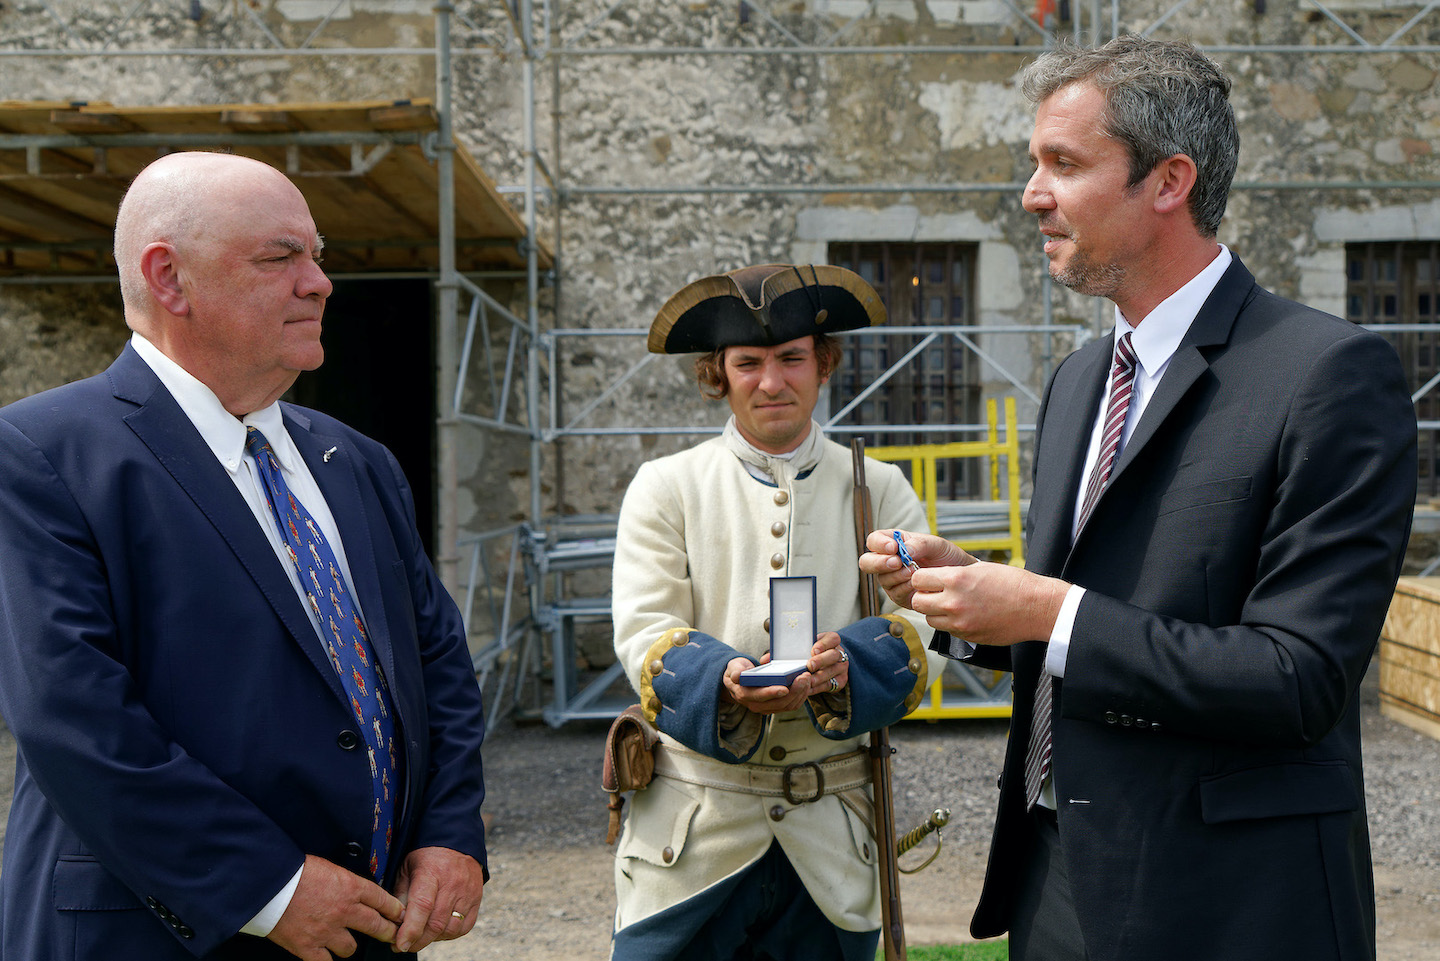 French Consul General Jeremie Robert presented Robert Emerson, executive director of Old Fort Niagara, the Ordre National Du Merite, or National Order of Merit. This award is in recognition of Emerson's work to preserve the French heritage at the fort during his 26 years of service there.